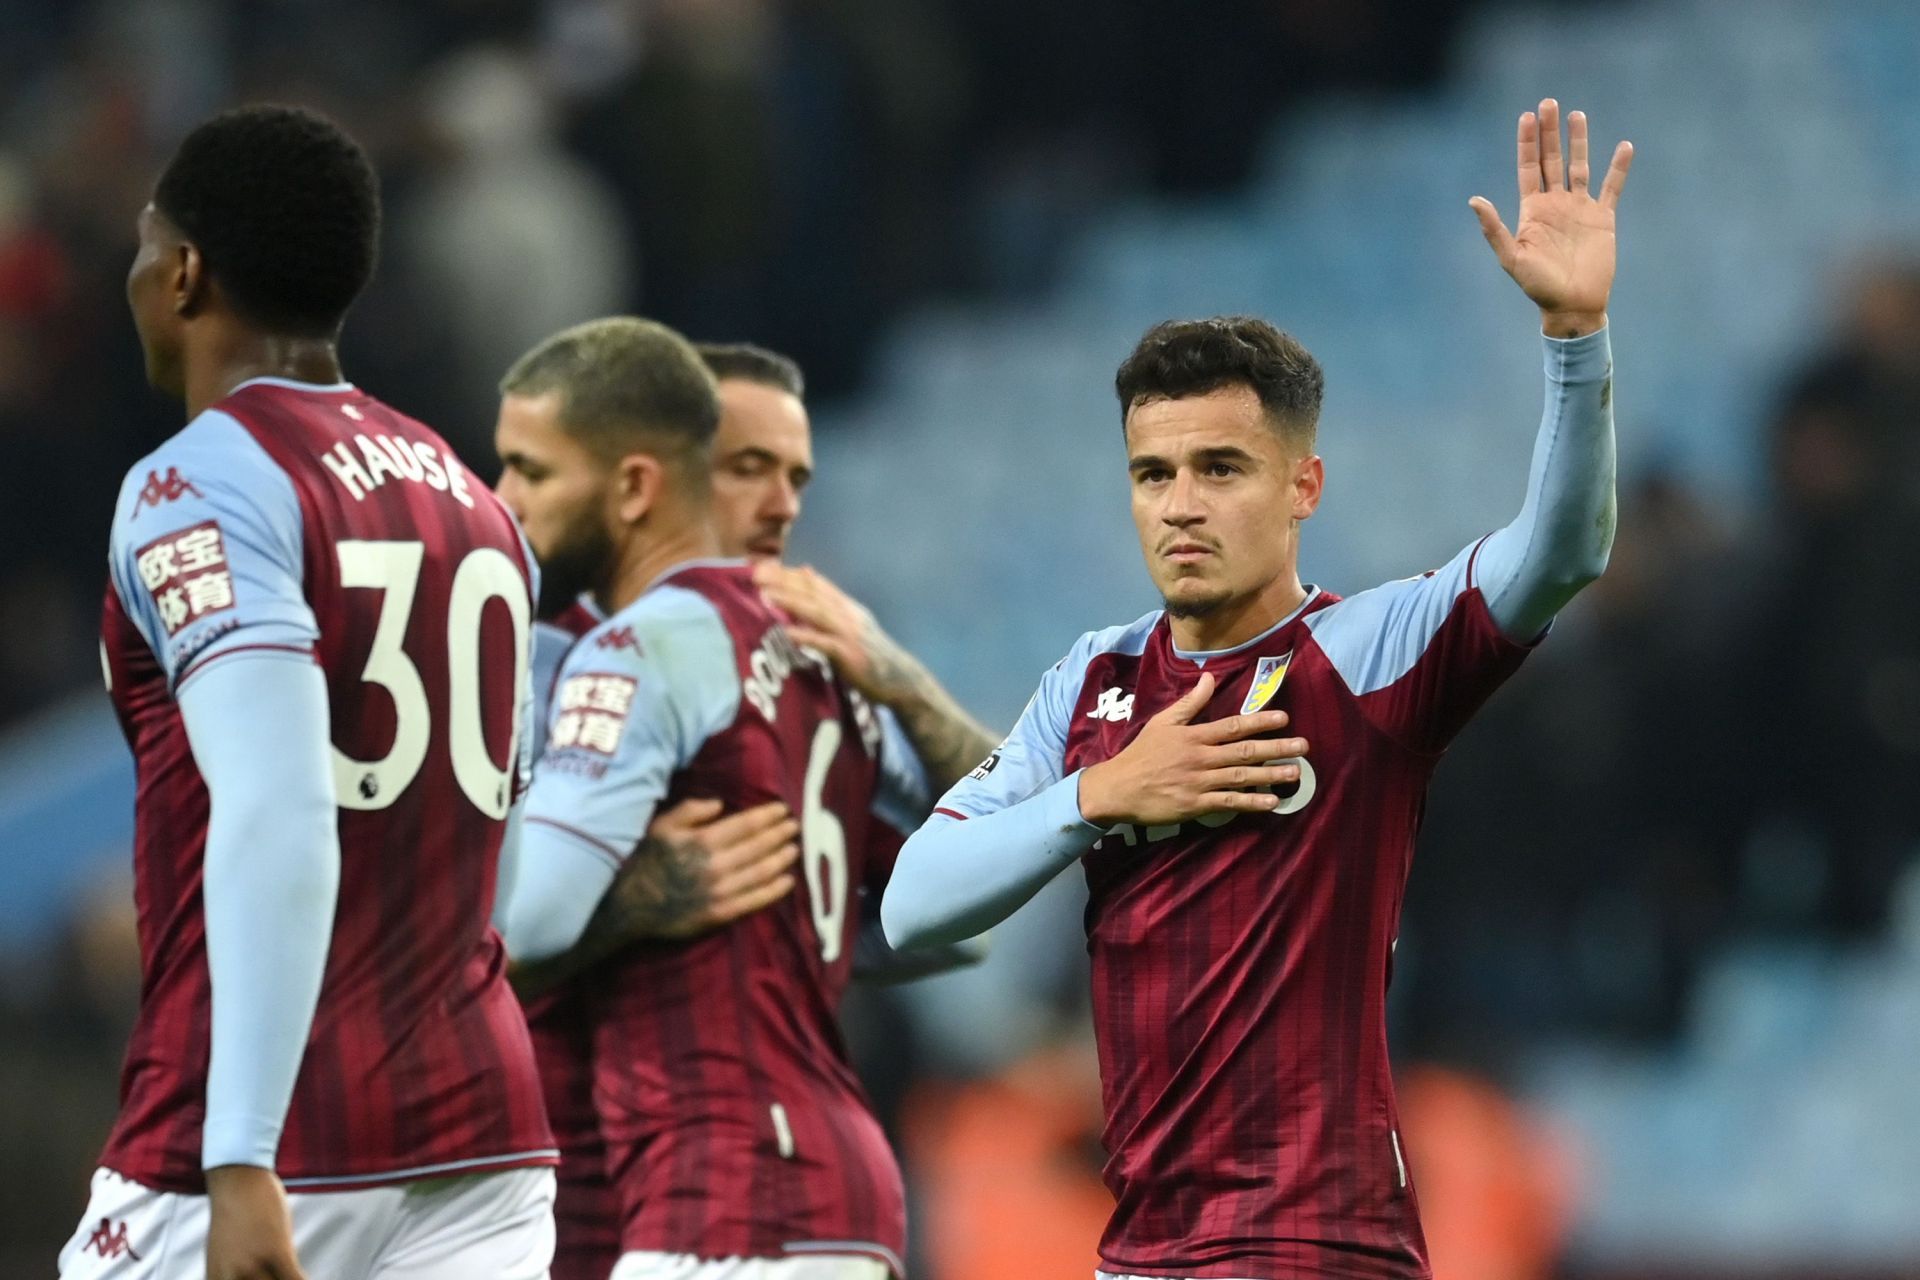 Philippe Coutinho&rsquo;s late equaliser helped Aston Villa salvage a thrilling 2-2 draw against Manchester United.